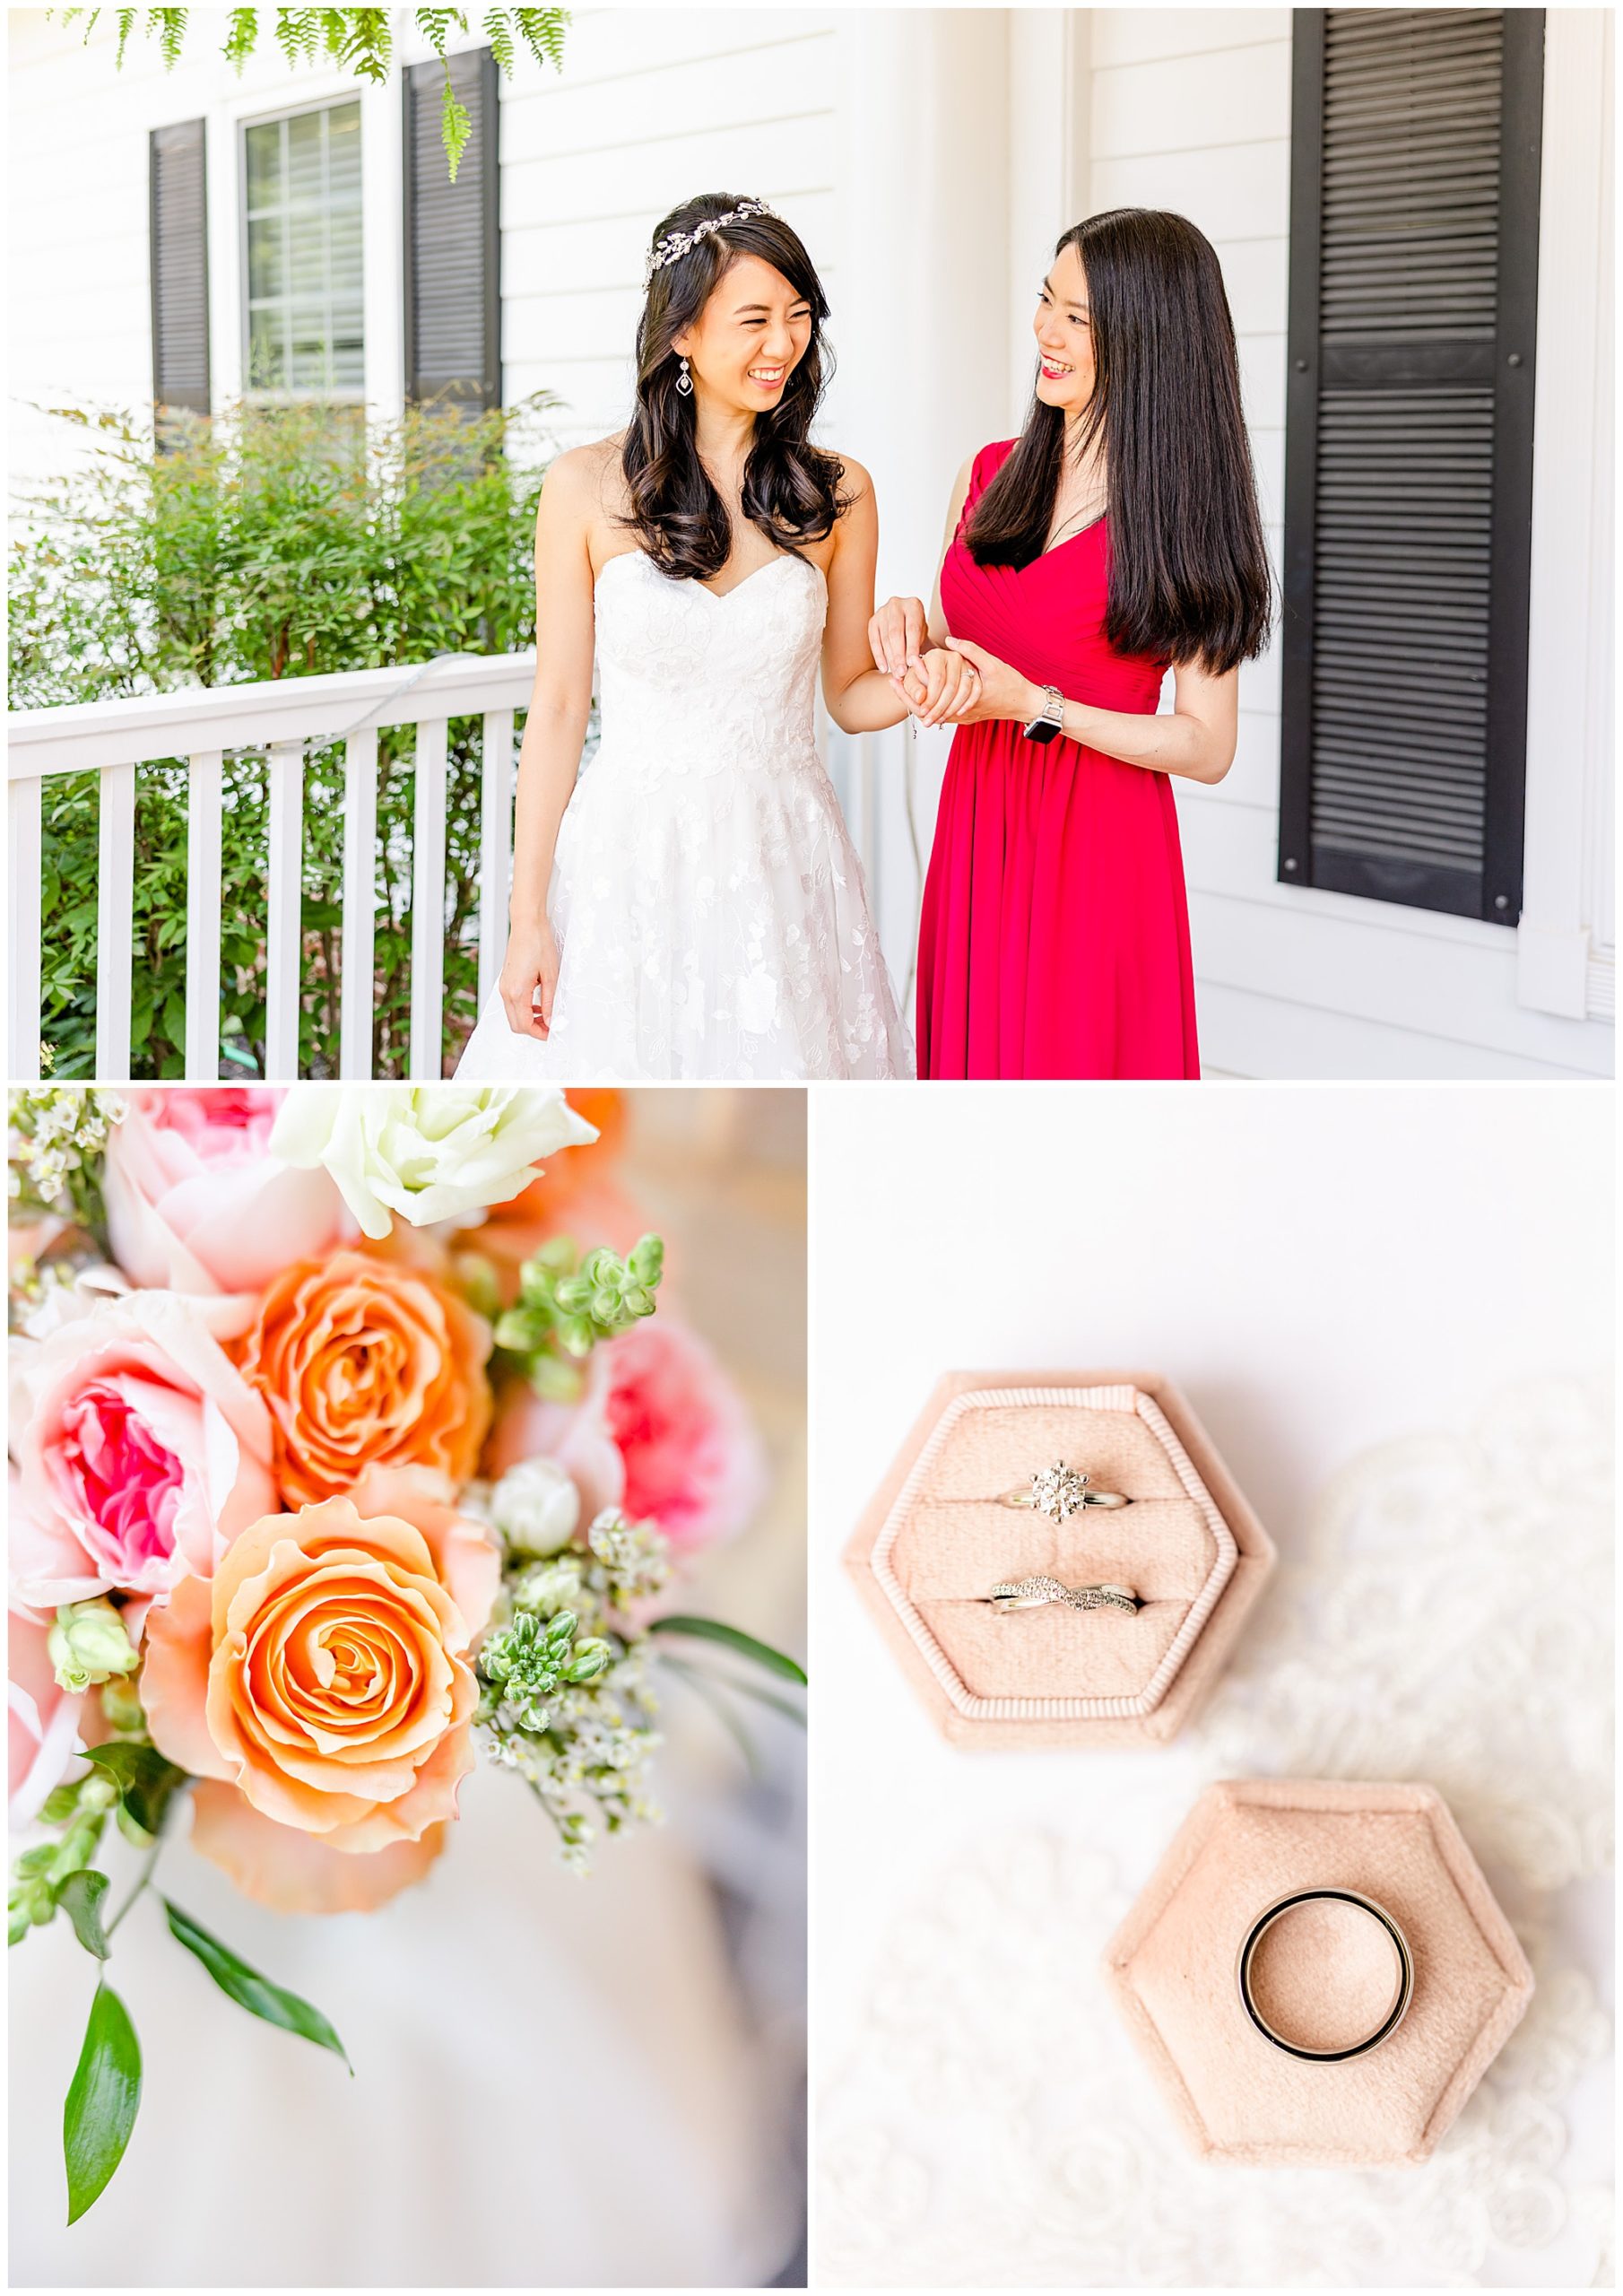 spring Westfields Golf Club wedding, Clifton Virginia wedding, northern Virginia wedding venue, DC wedding photographer, DC photographer, Virginia country club wedding, spring wedding aesthetic, Chinese American wedding, Rachel E.H.Photography, bride holding bridesmaids hand, orange and pink bouquet, wedding rings in pink box